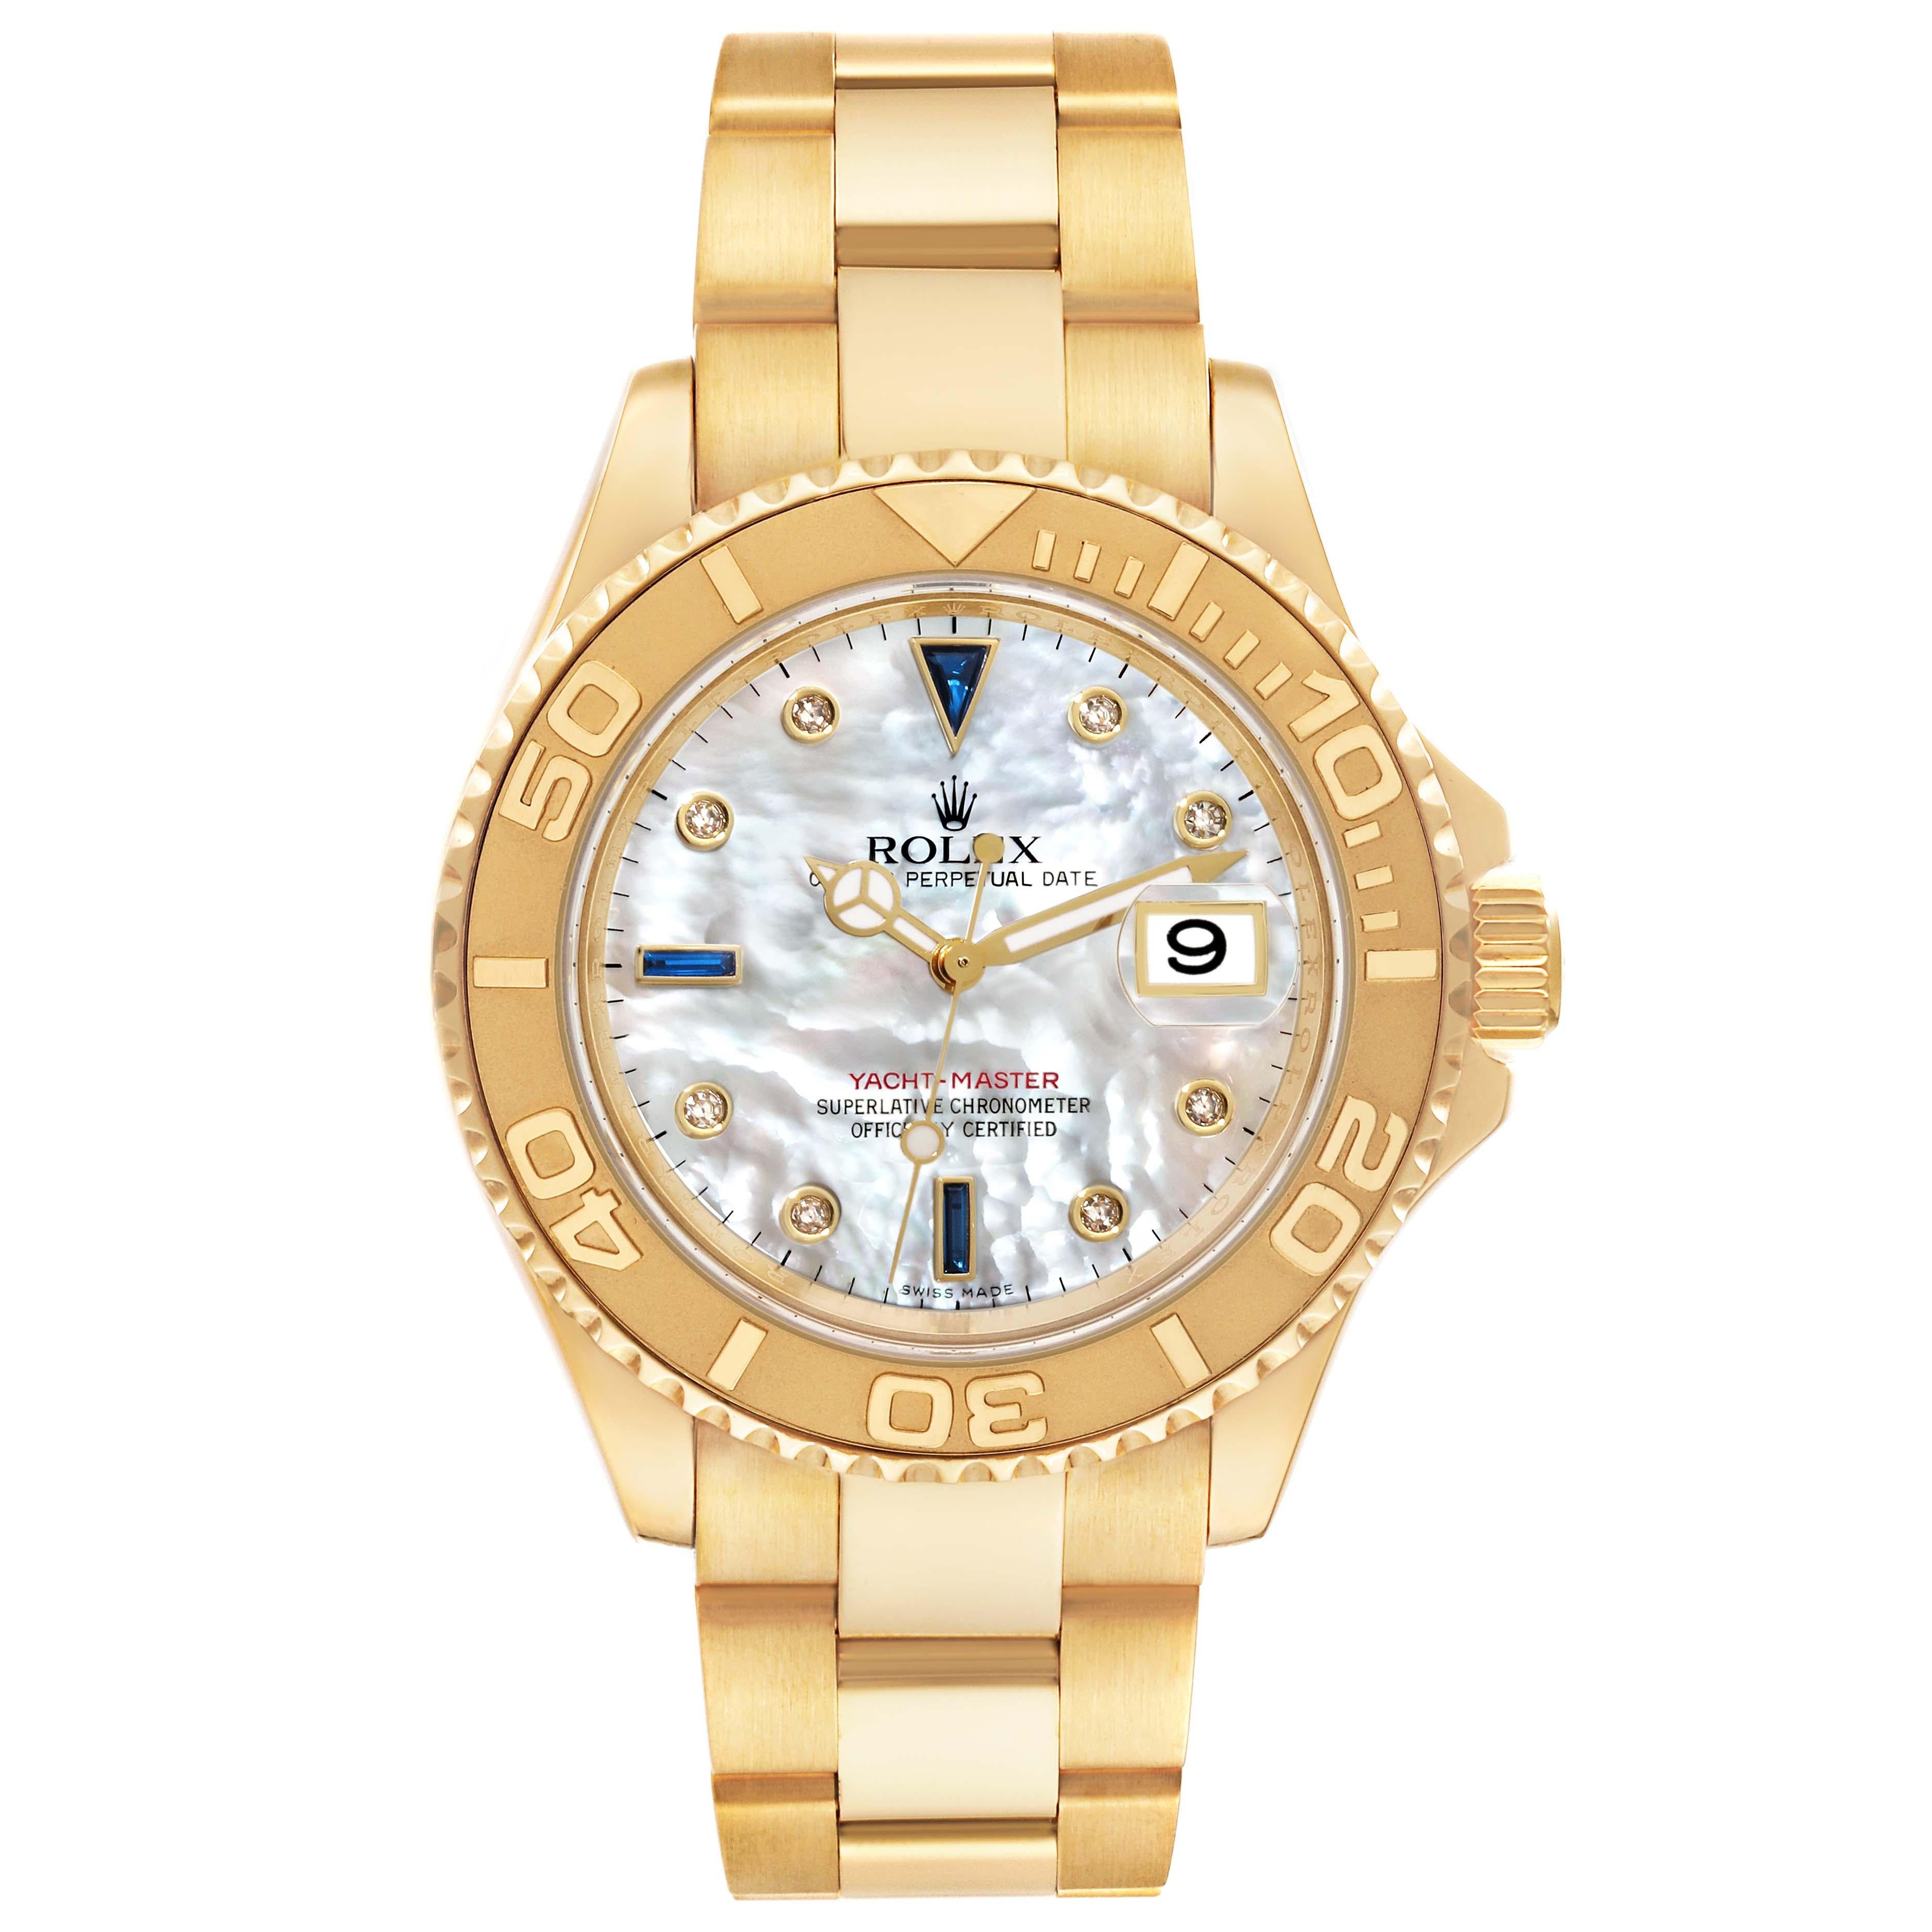 Rolex Yachtmaster Yellow Gold Mother of Pearl Diamond Sapphire Serti Mens Watch 16628. Officially certified chronometer automatic self-winding movement. Rhodium-plated, oeil-de-perdrix decoration, straight-line lever escapement, freesprung